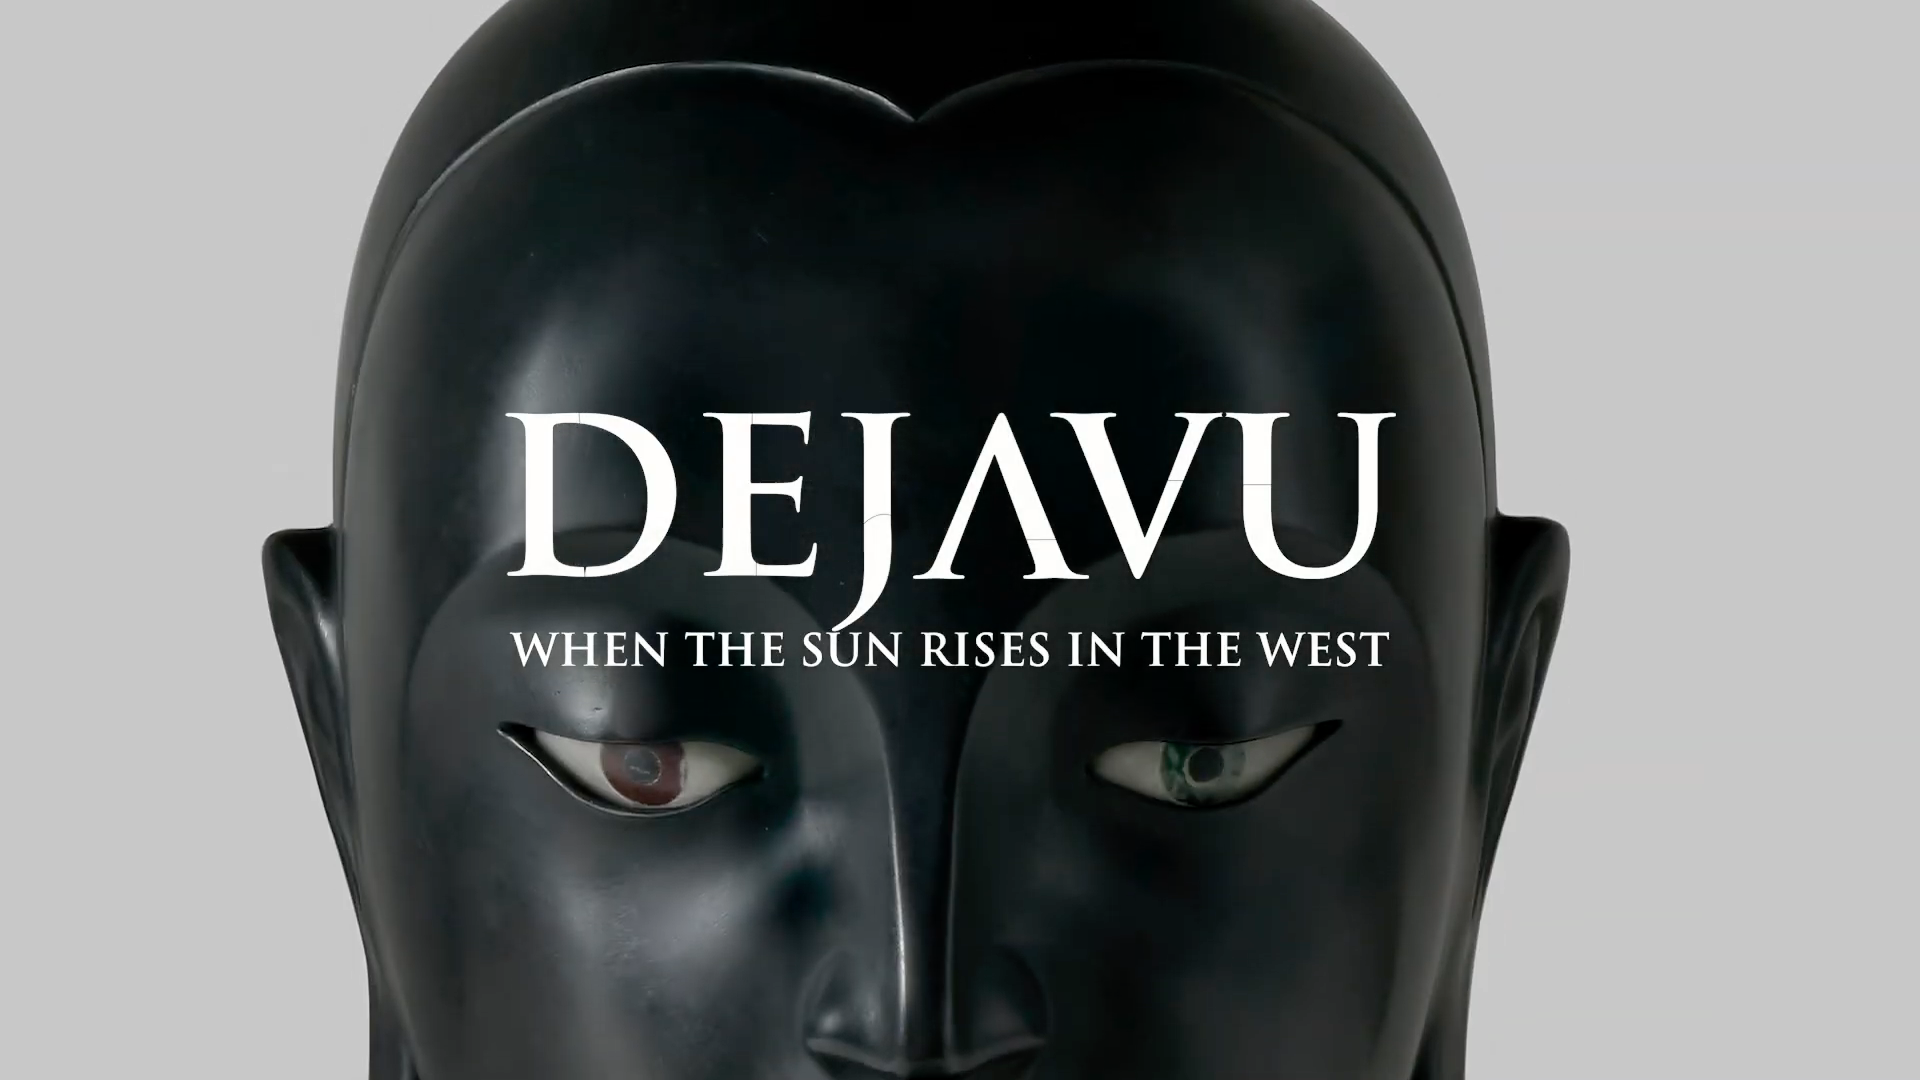 [RKFA-BKK] “Déjà vu: When the Sun Rises in the West” by Natee Utarit Part 1, 4 March – 7 May 2022